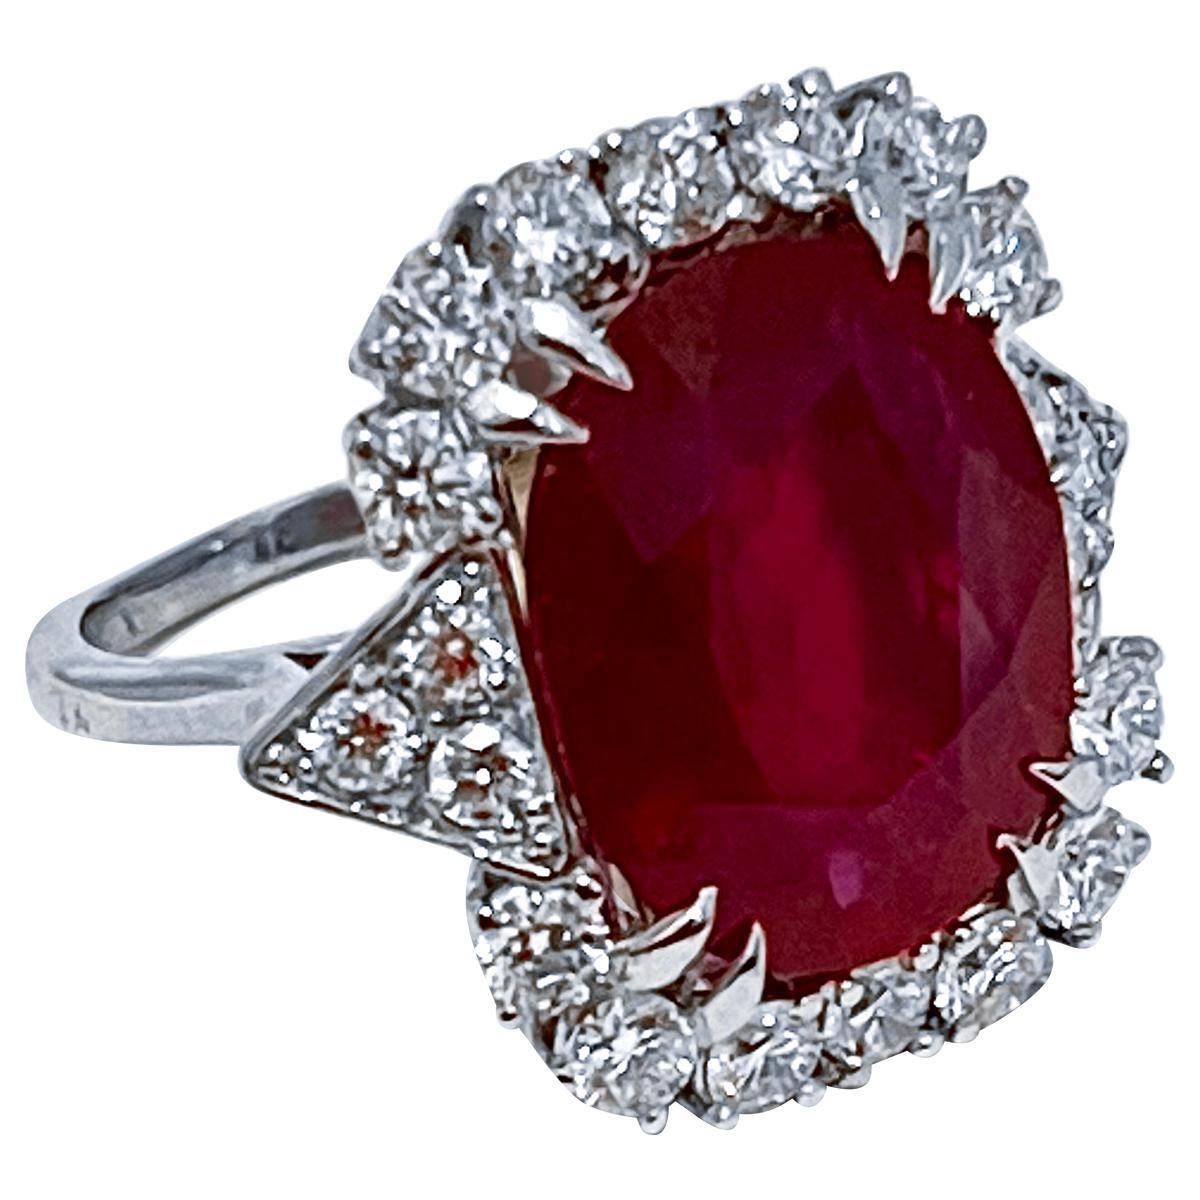 approximately 12 Carat Emerald shape Treated Ruby And Diamond Platinum Ring Size 6
 Double prong set, Just beautifully done 
Platinum 9.2 Grams
Ring Size 6 ( can be altered for no charge )

Diamonds:  approximate 2 Carat , all brilliant round cut